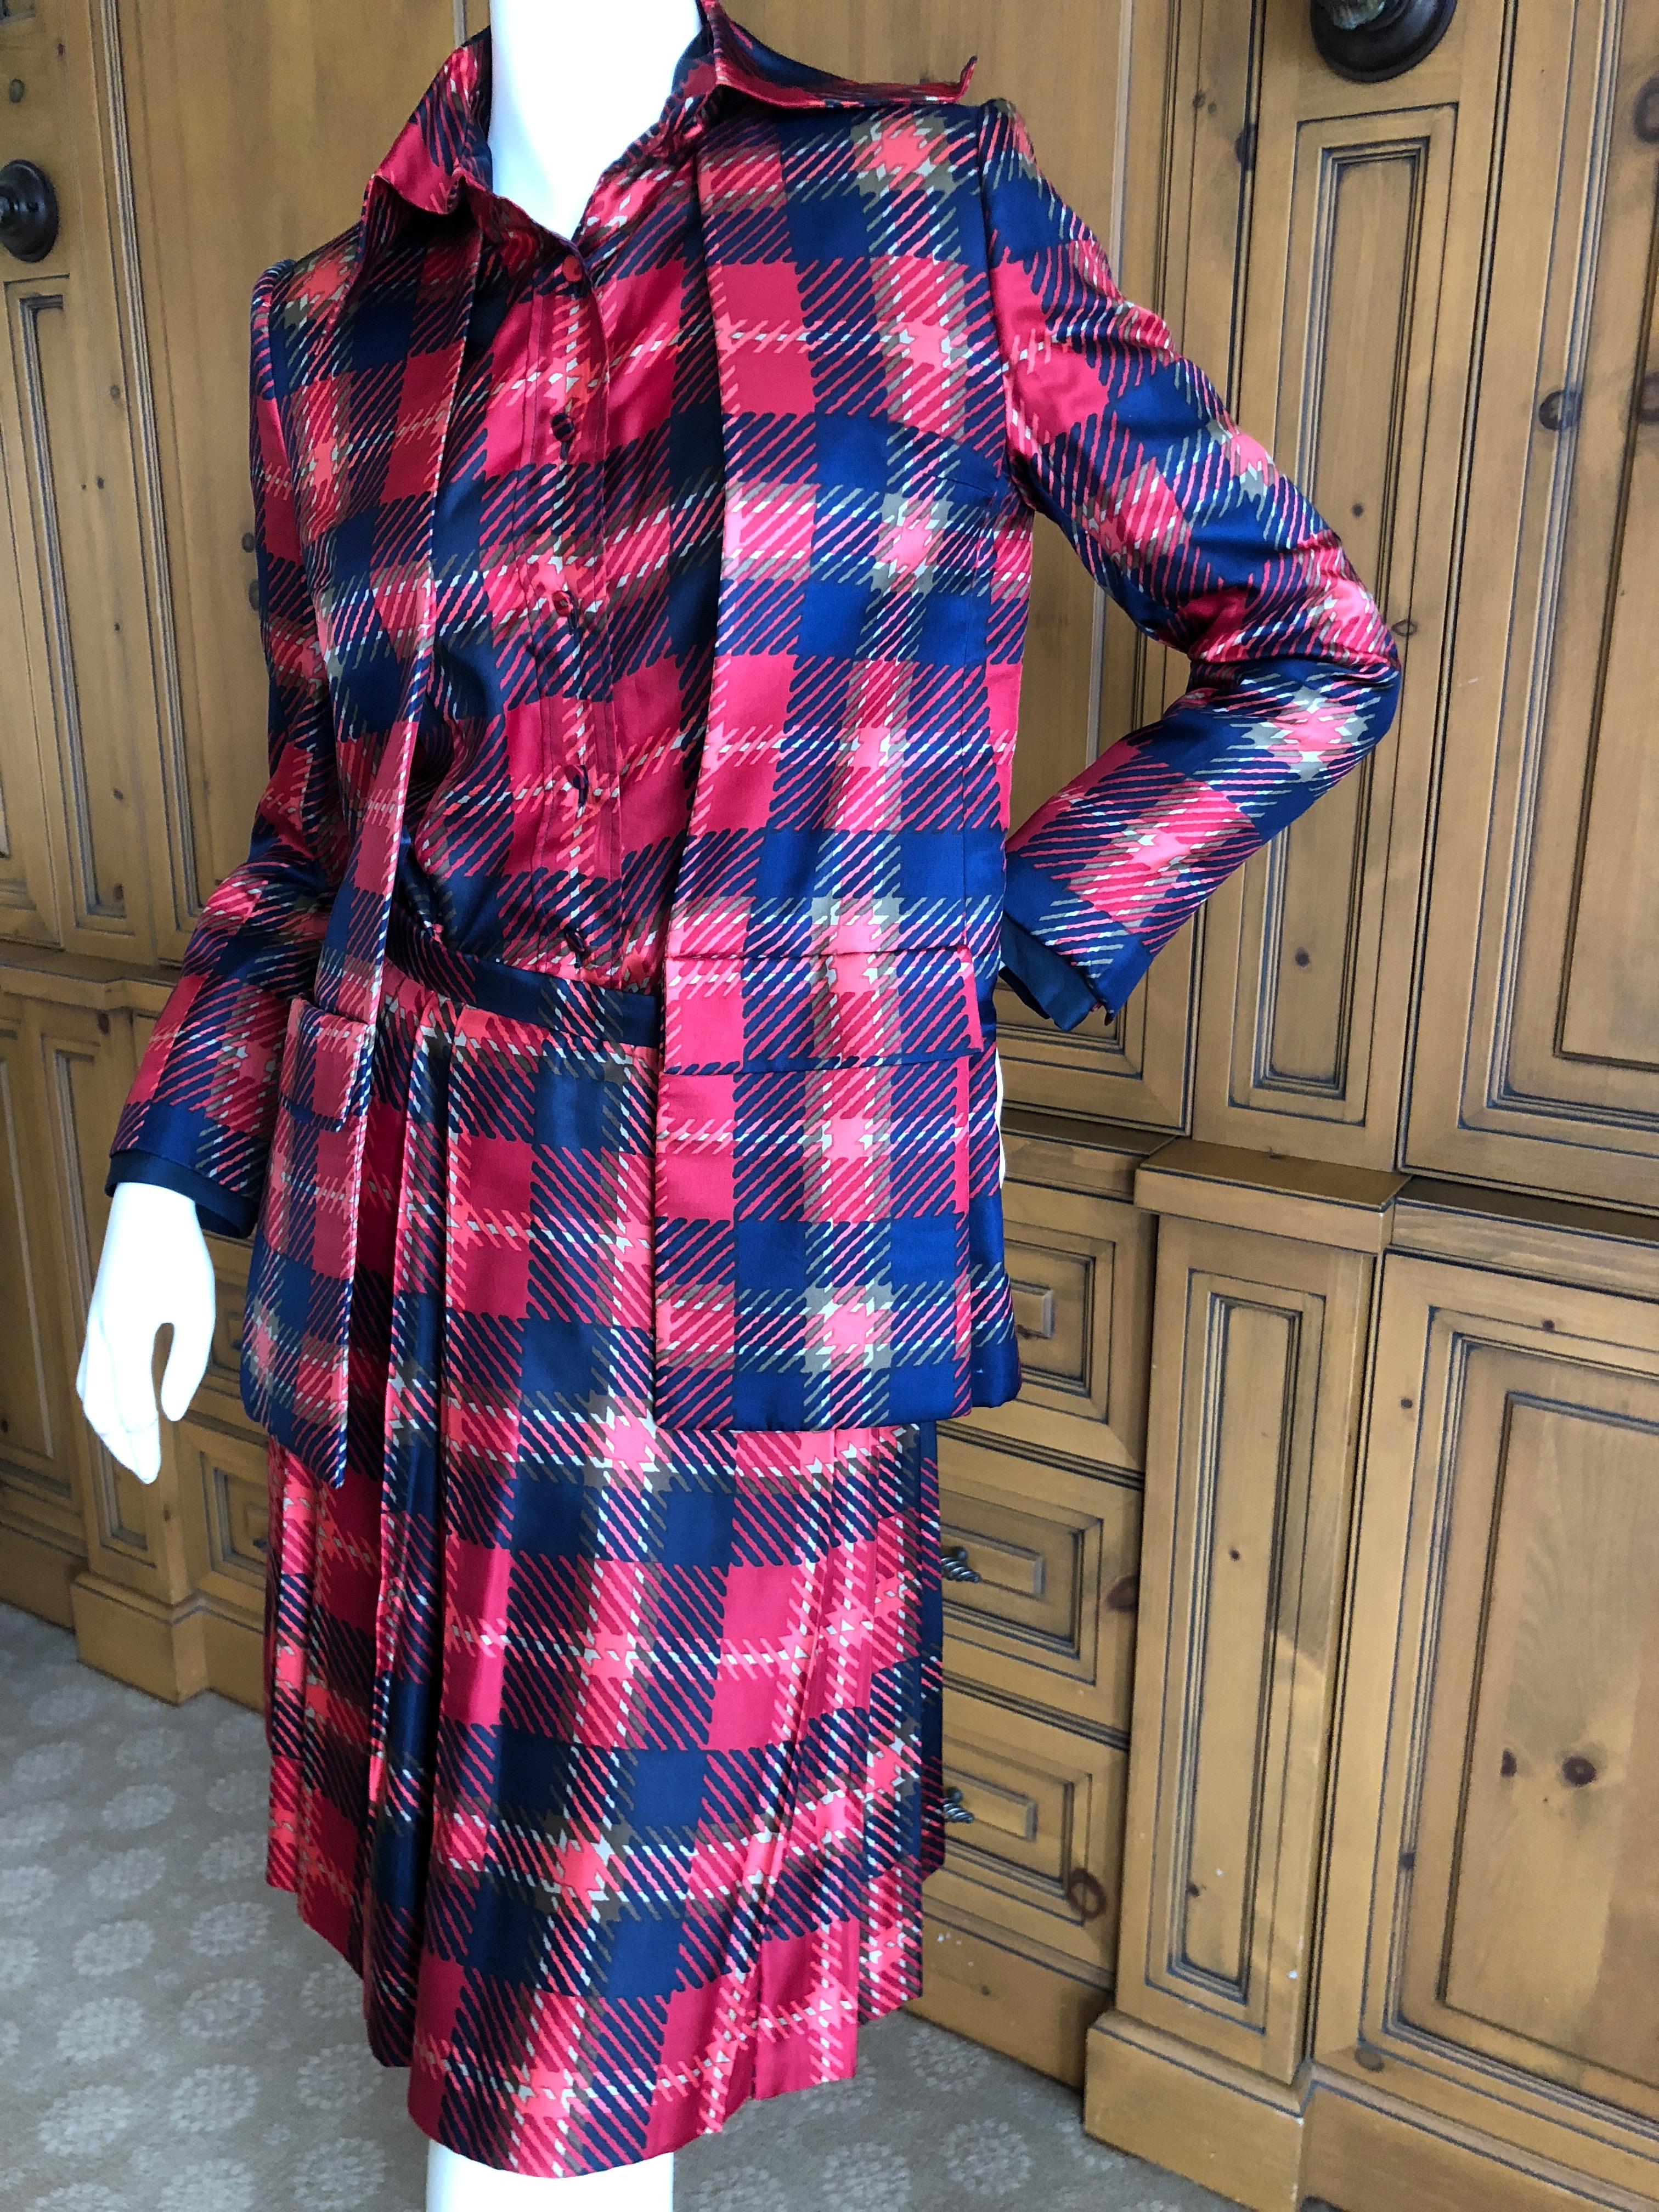 Cardinali Plaid Silk Three Piece Skirt Suit with Jacket Fall 1972 For Sale 3